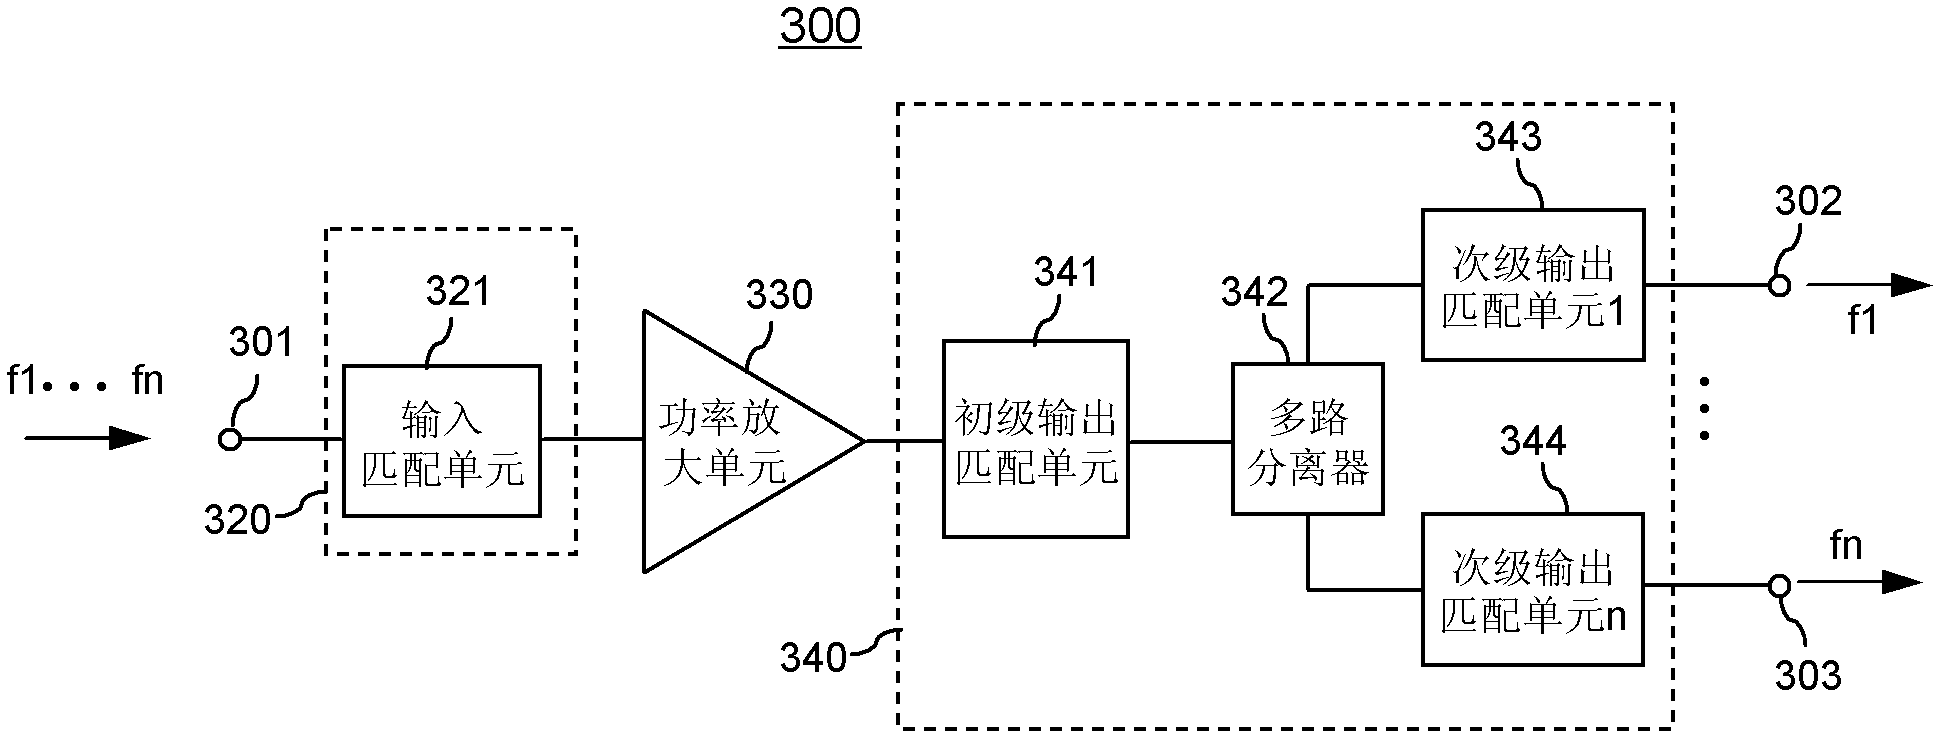 Multi-frequency-band power amplifier